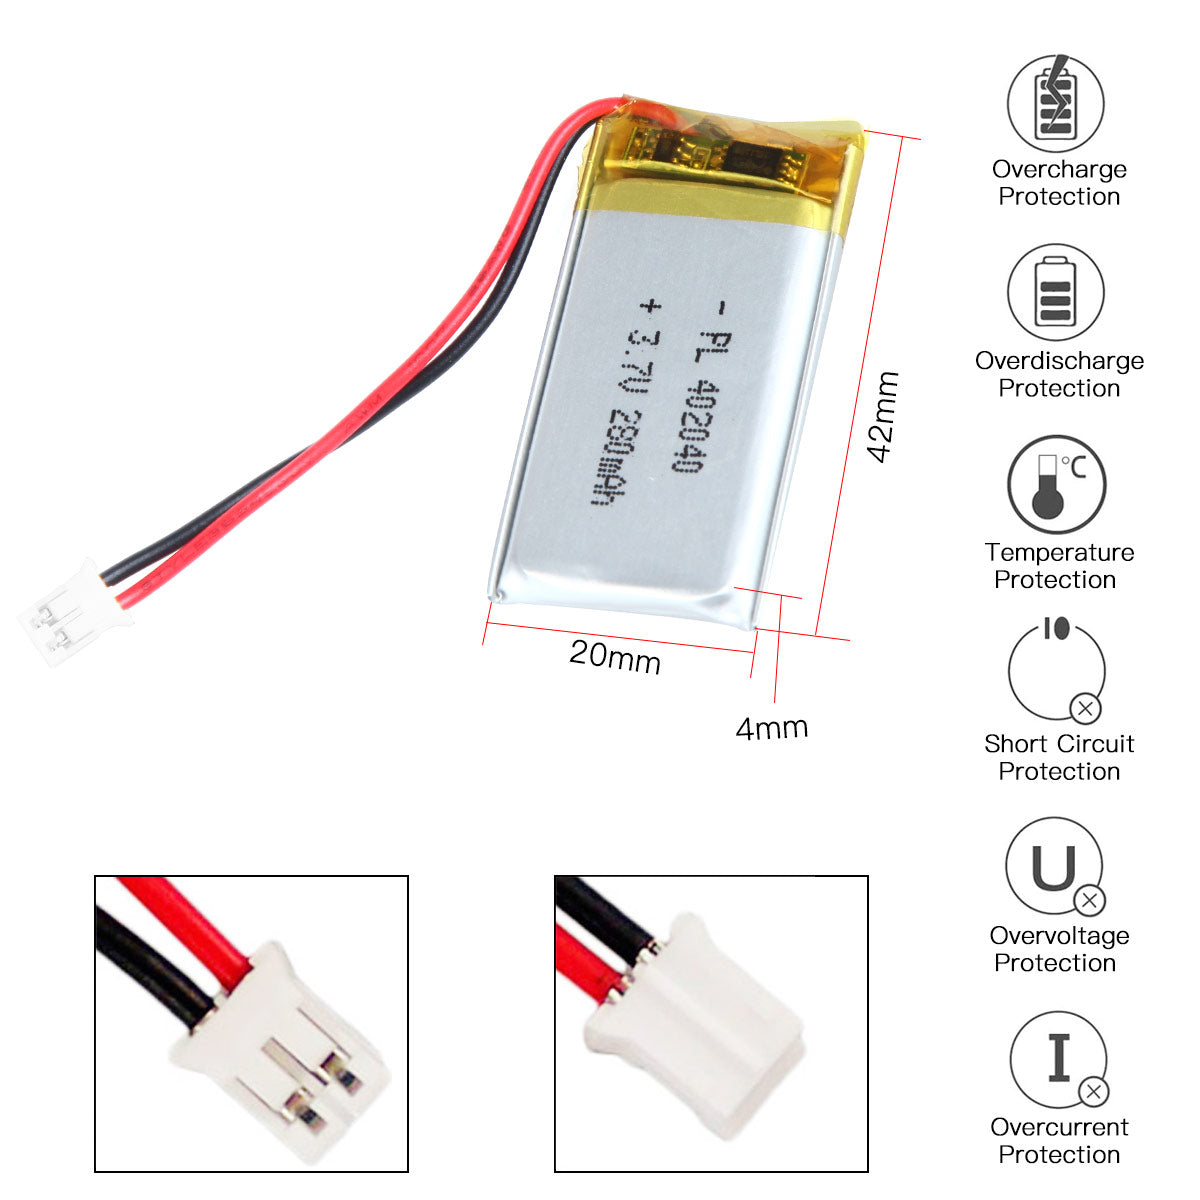 YDL 3.7V 280mAh 402040 Rechargeable Lipo Battery with JST Connector - YDL Battery